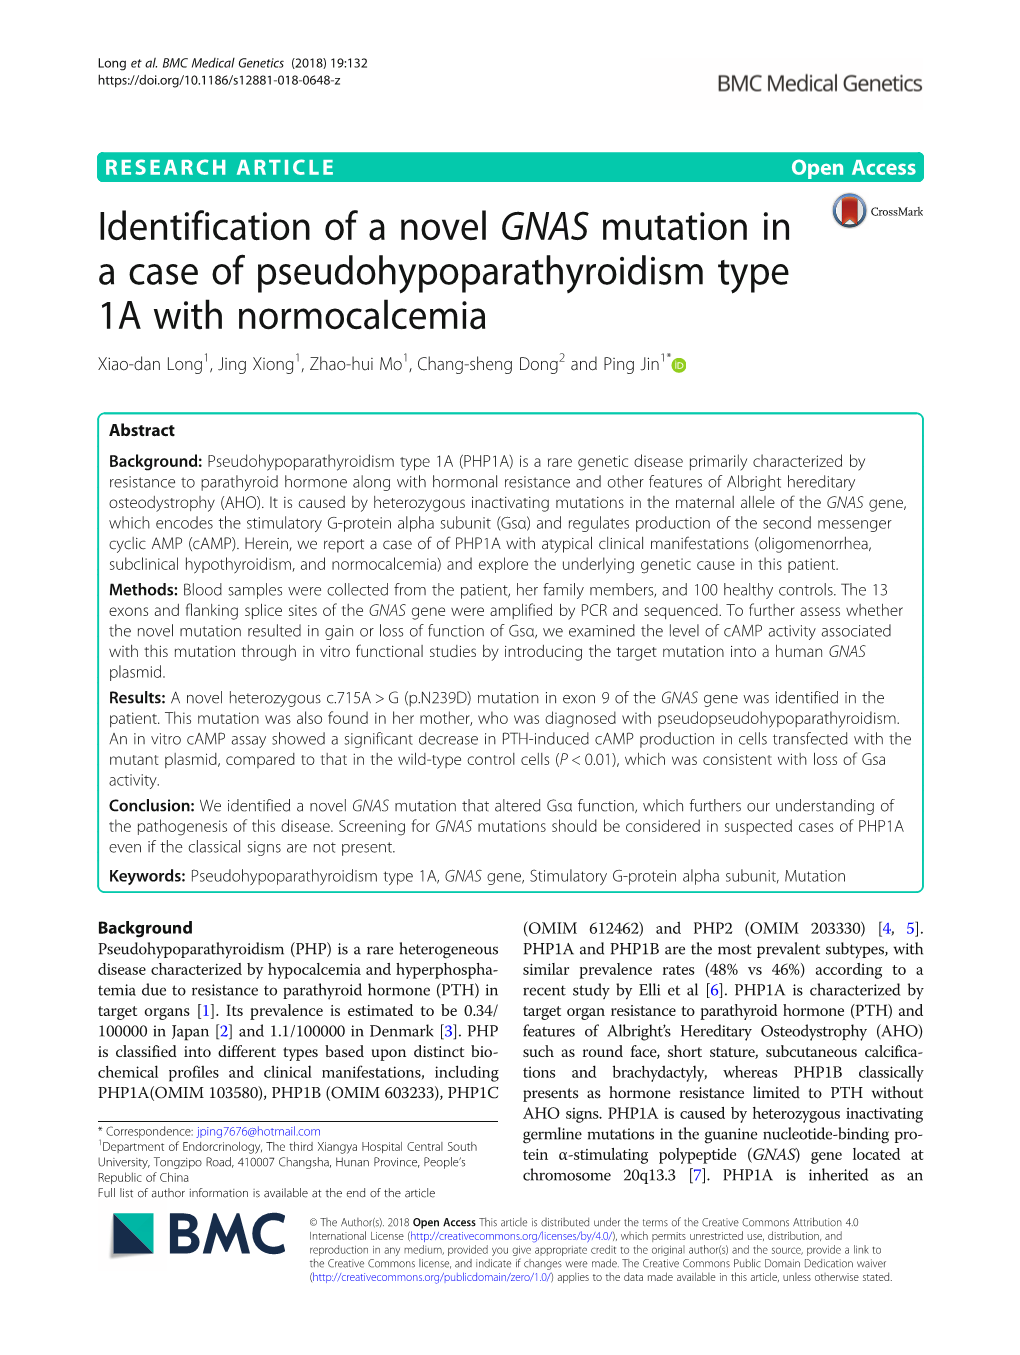 Identification of a Novel GNAS Mutation in a Case Of